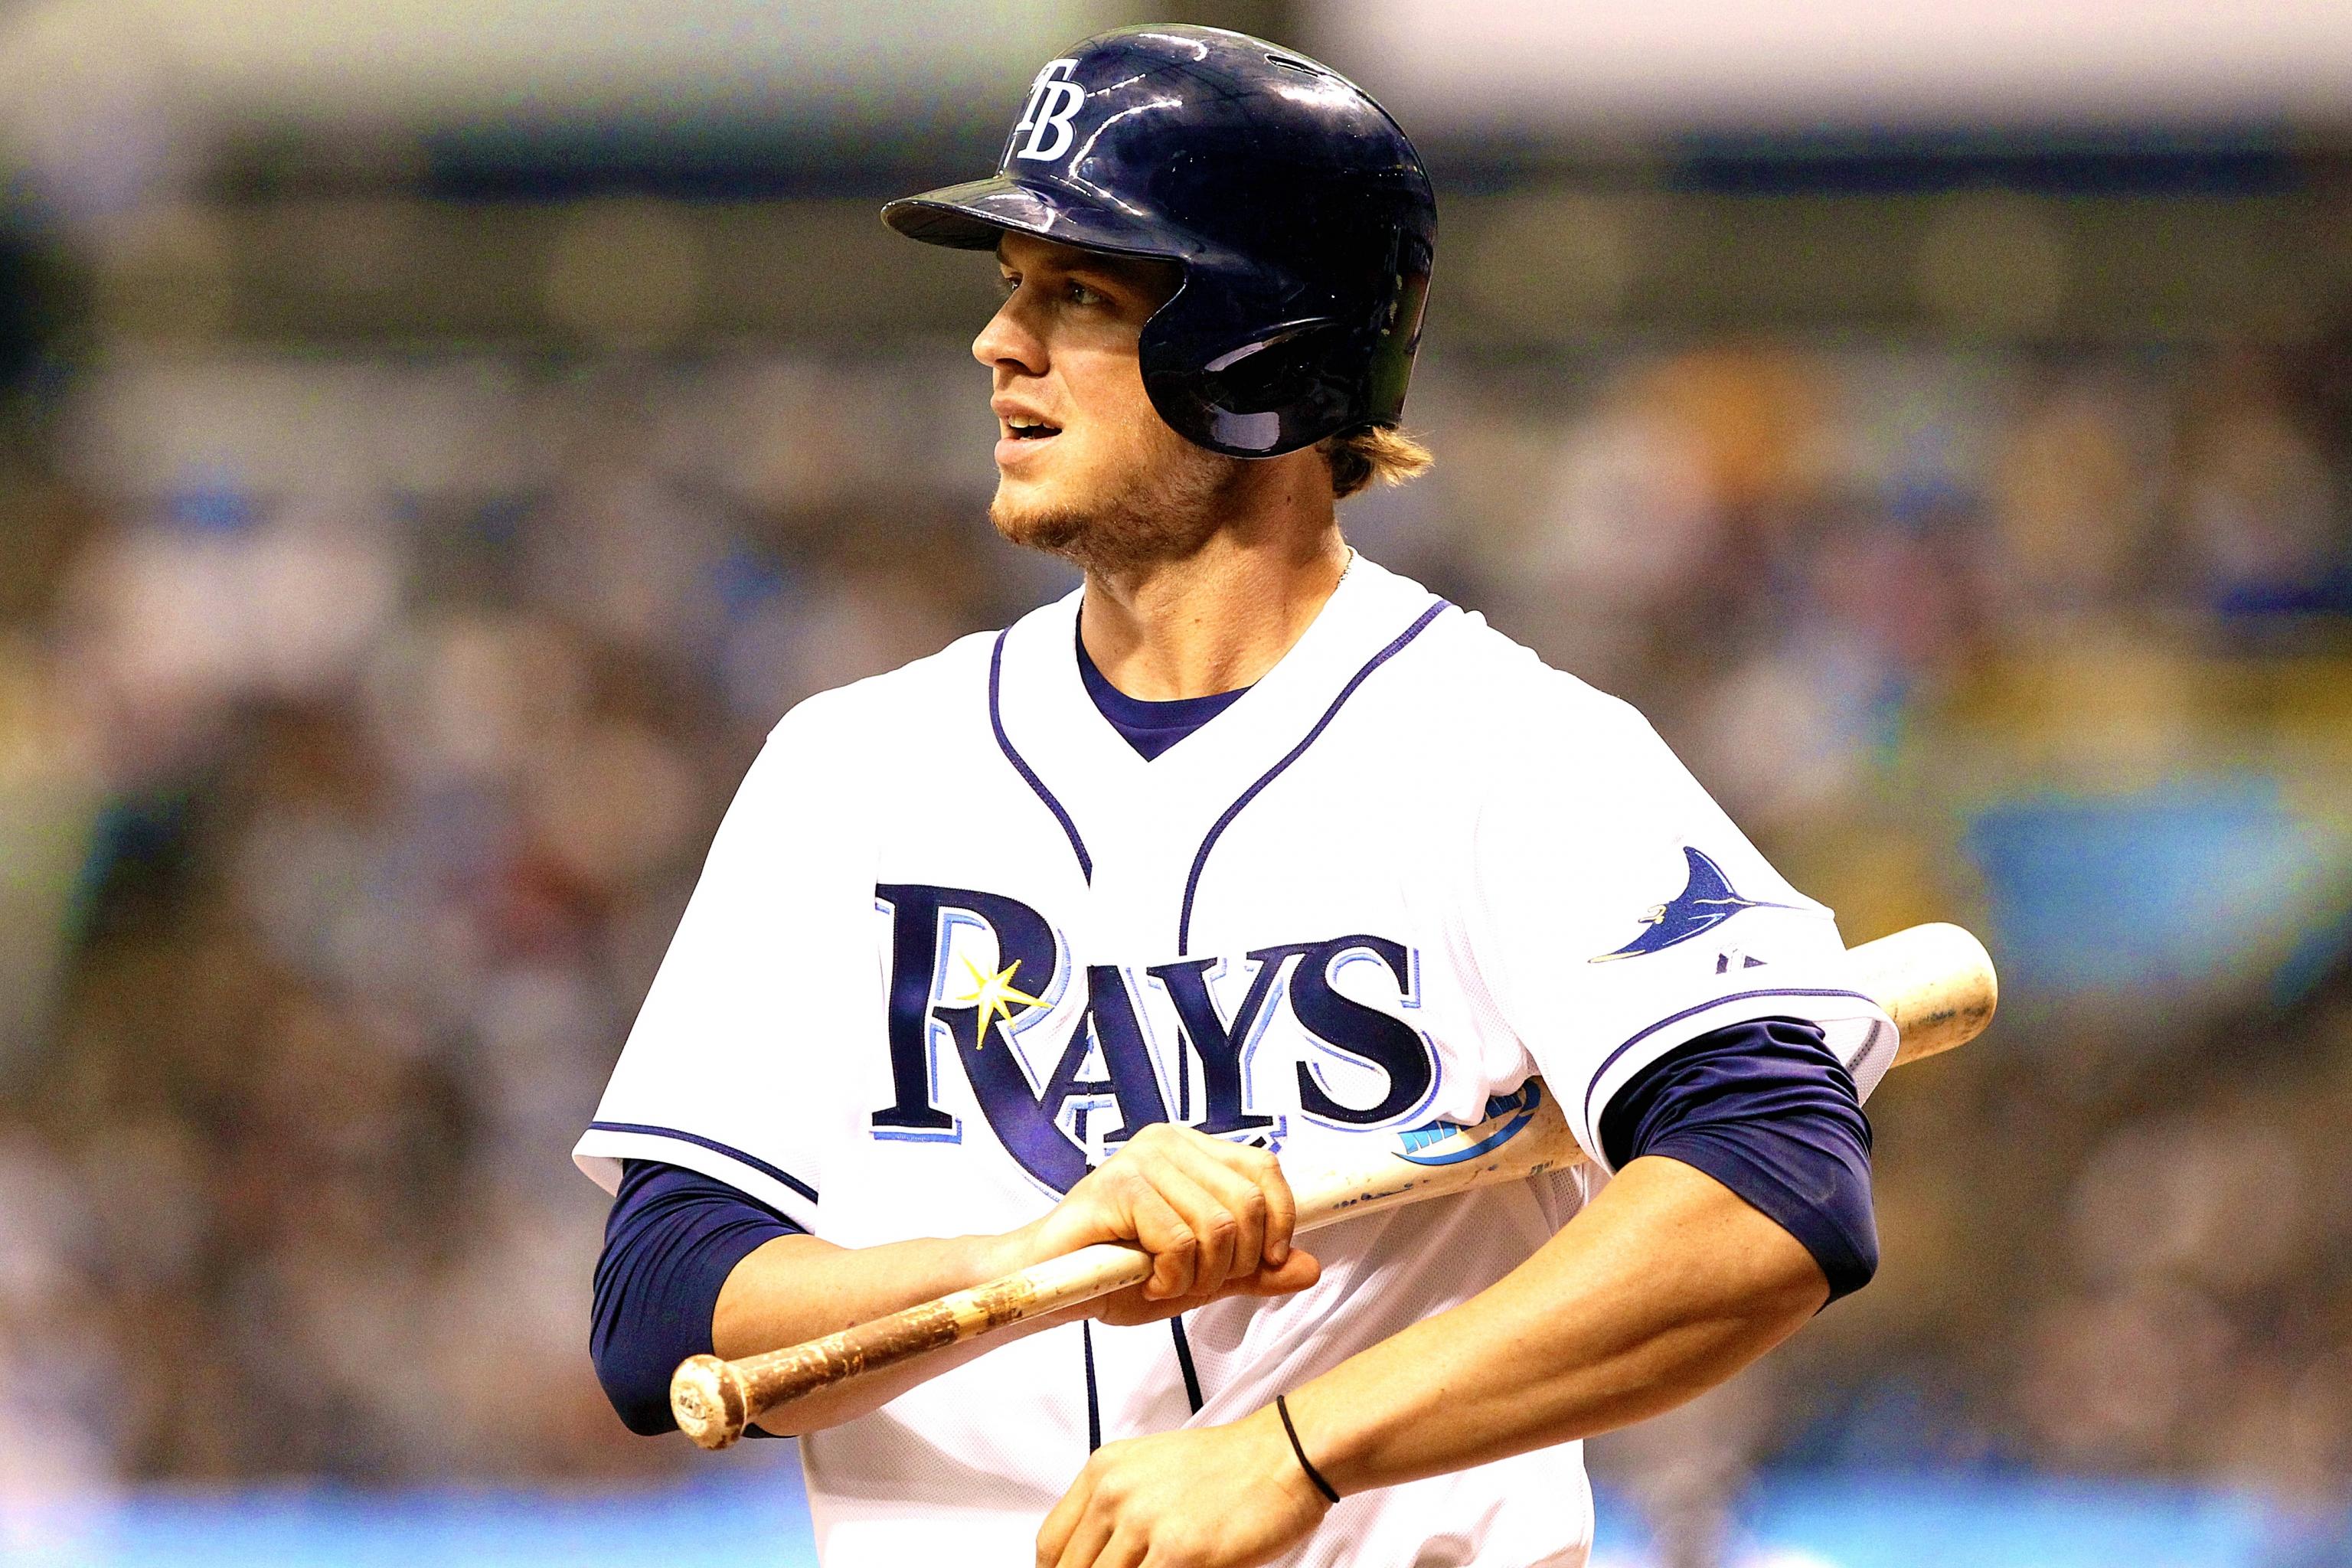 Wil Myers nearing return to Rays